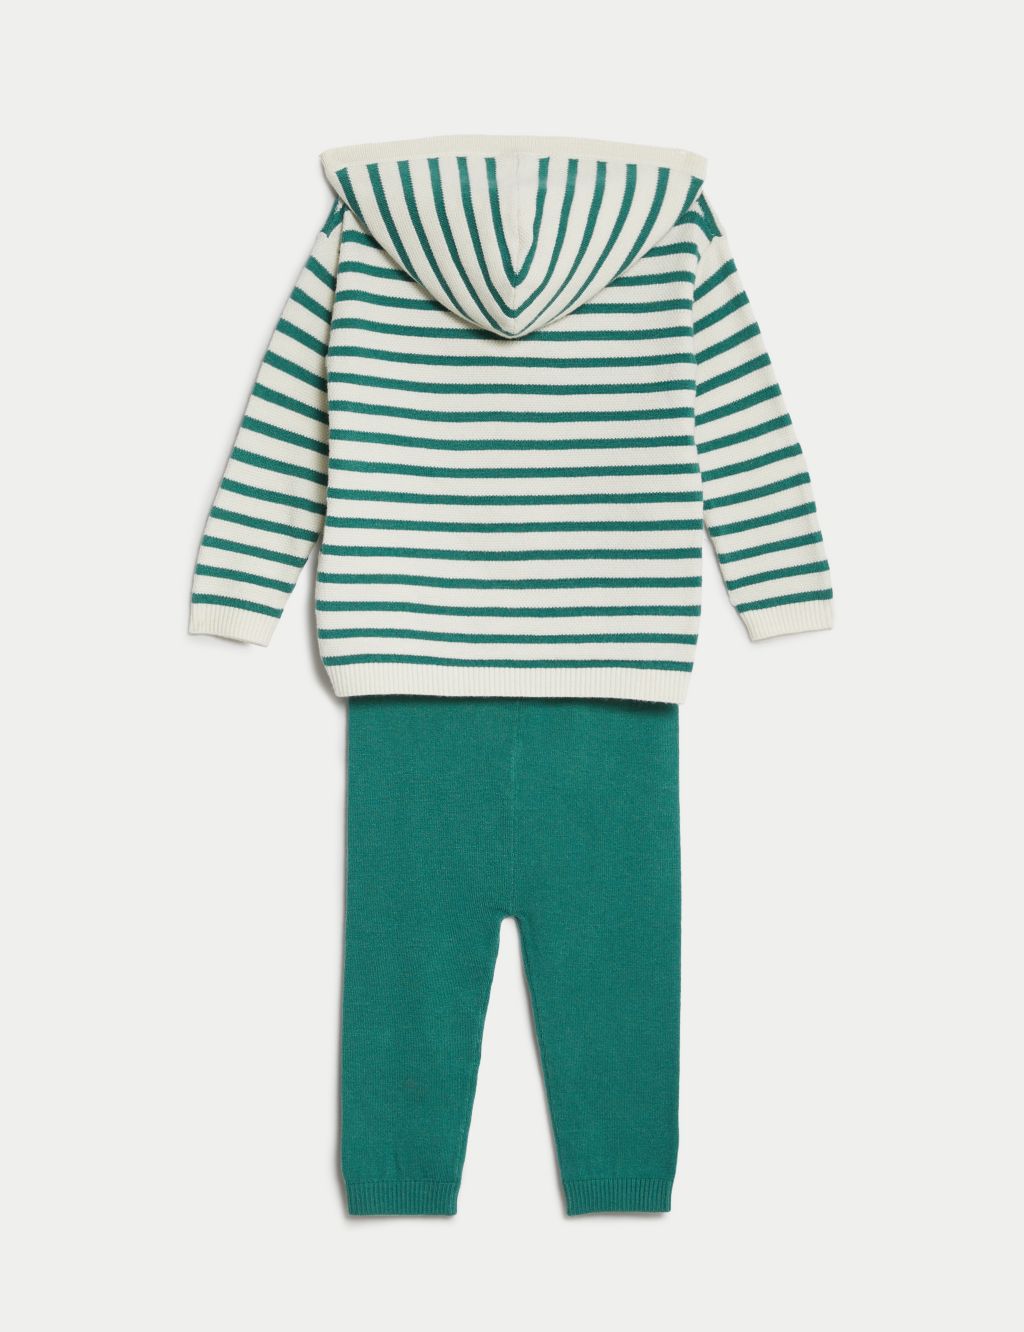 Striped Hooded Knitted Outfit (0-3 Yrs) image 2